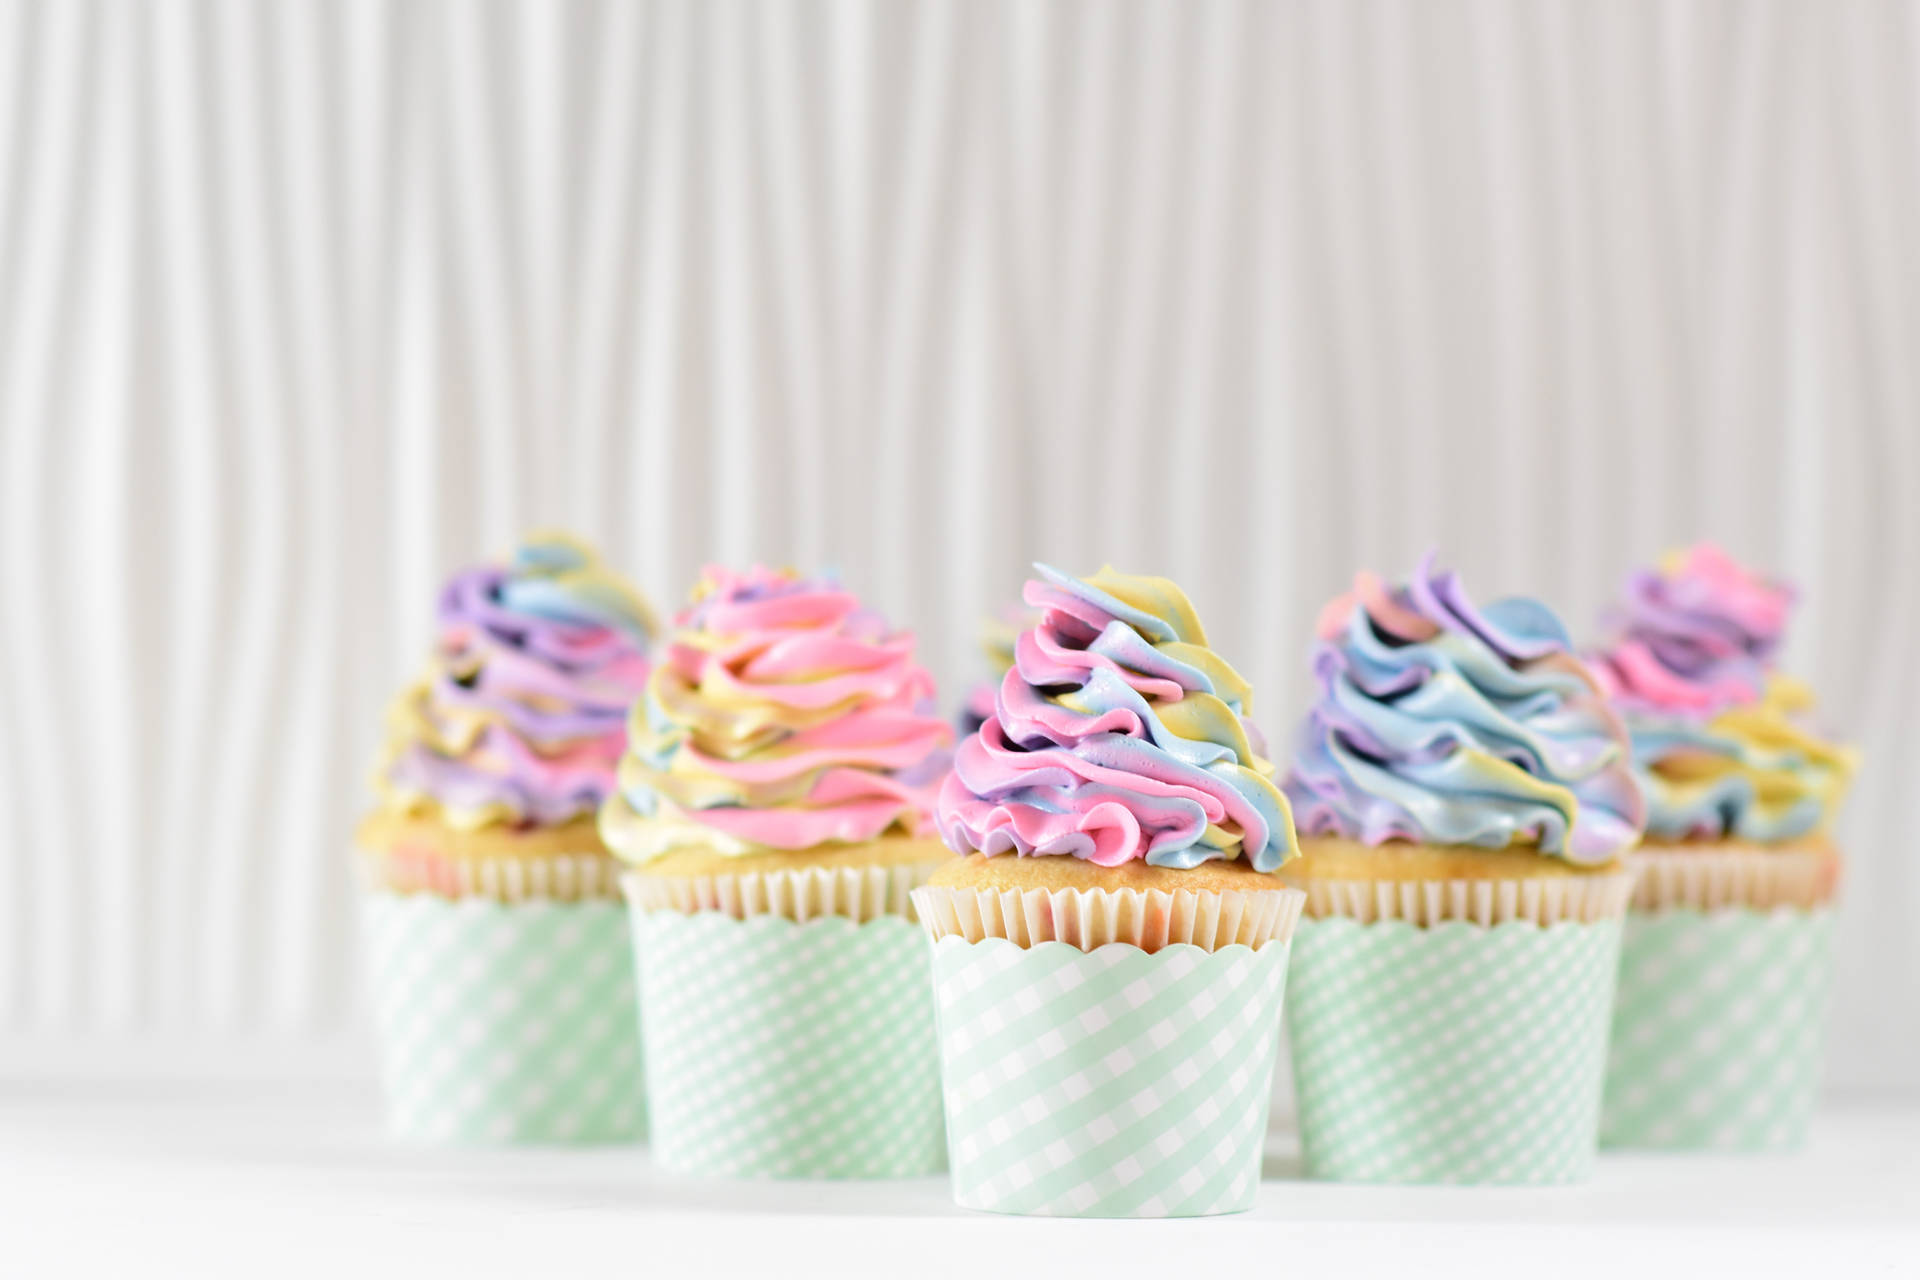 Update 89+ cakes and cupcakes wallpaper best